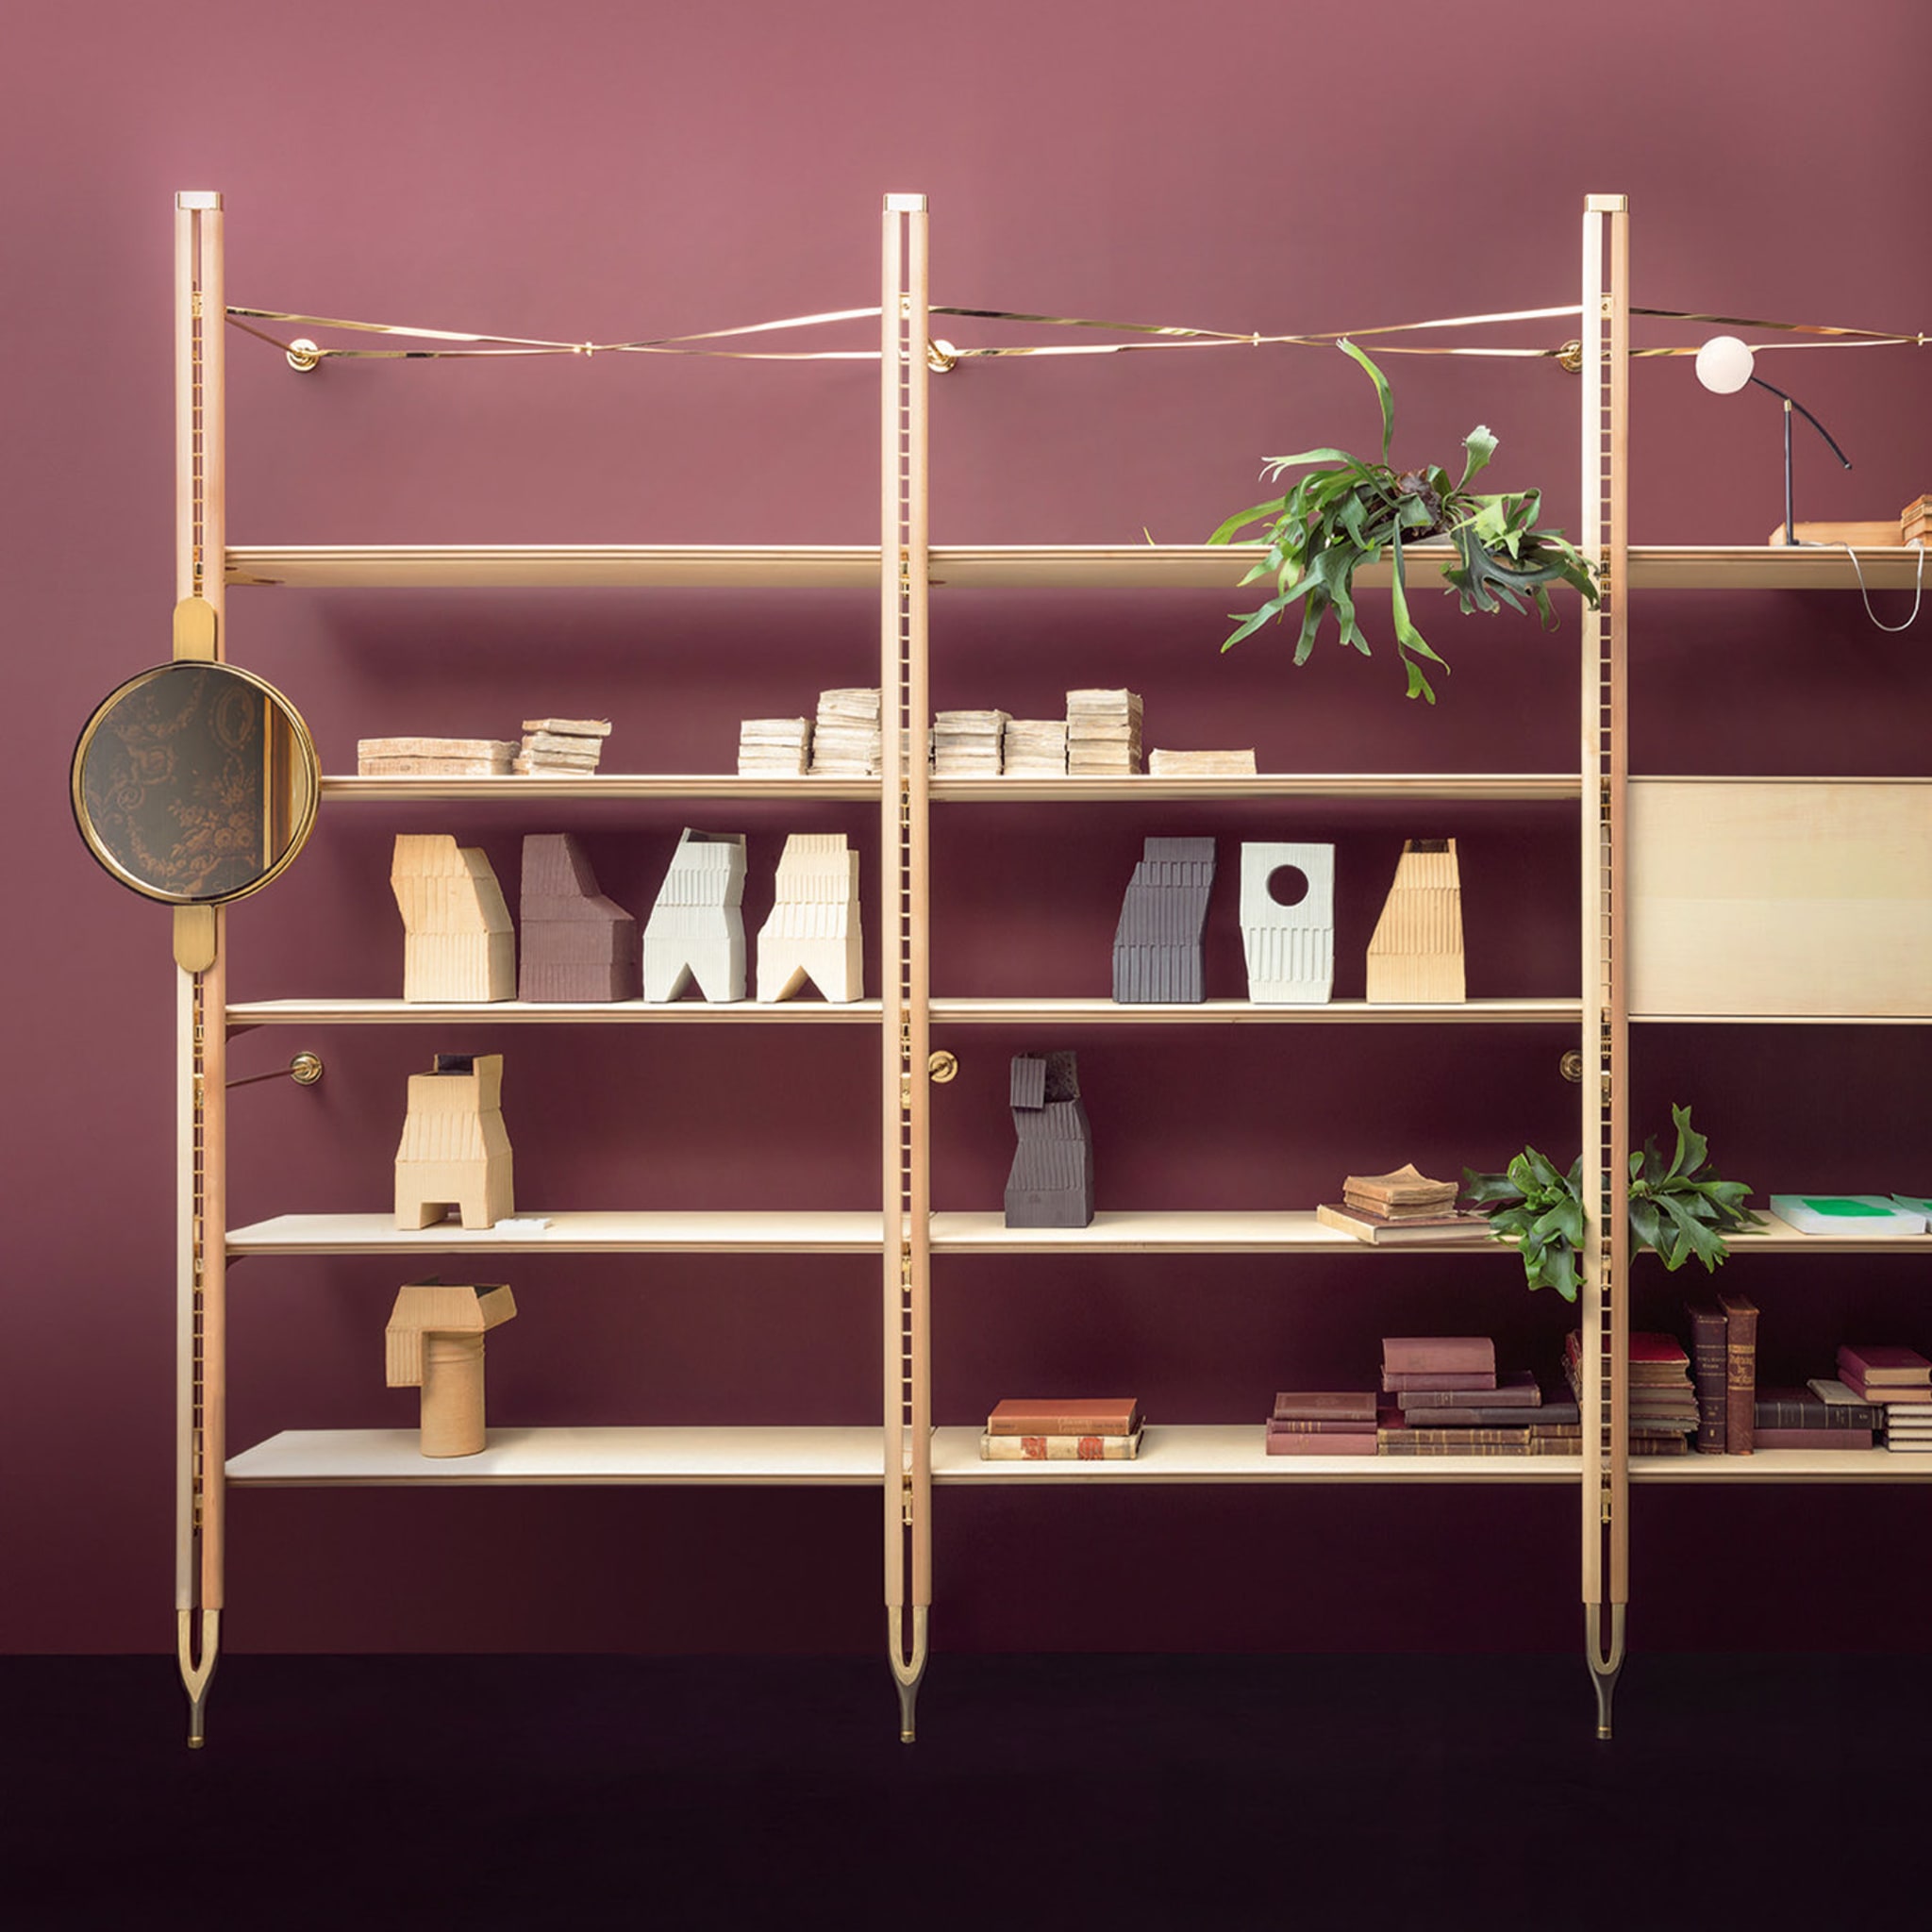 Basilea Maple and Beechwood Bookcase by Paolo Cappello - Alternative view 1